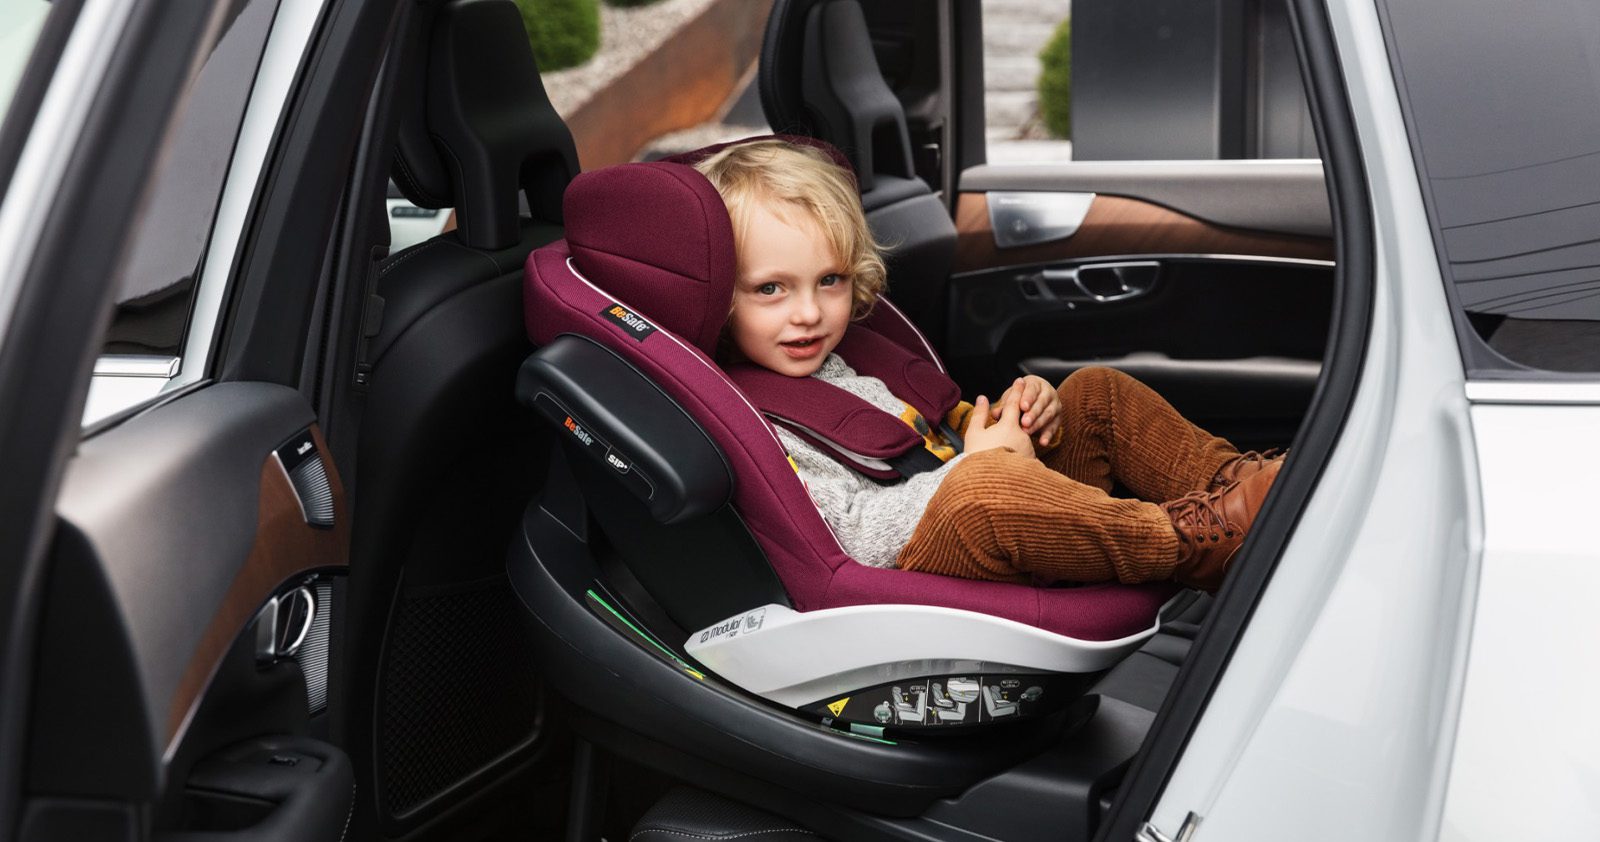 Extended rear-facing weight limit on child seats